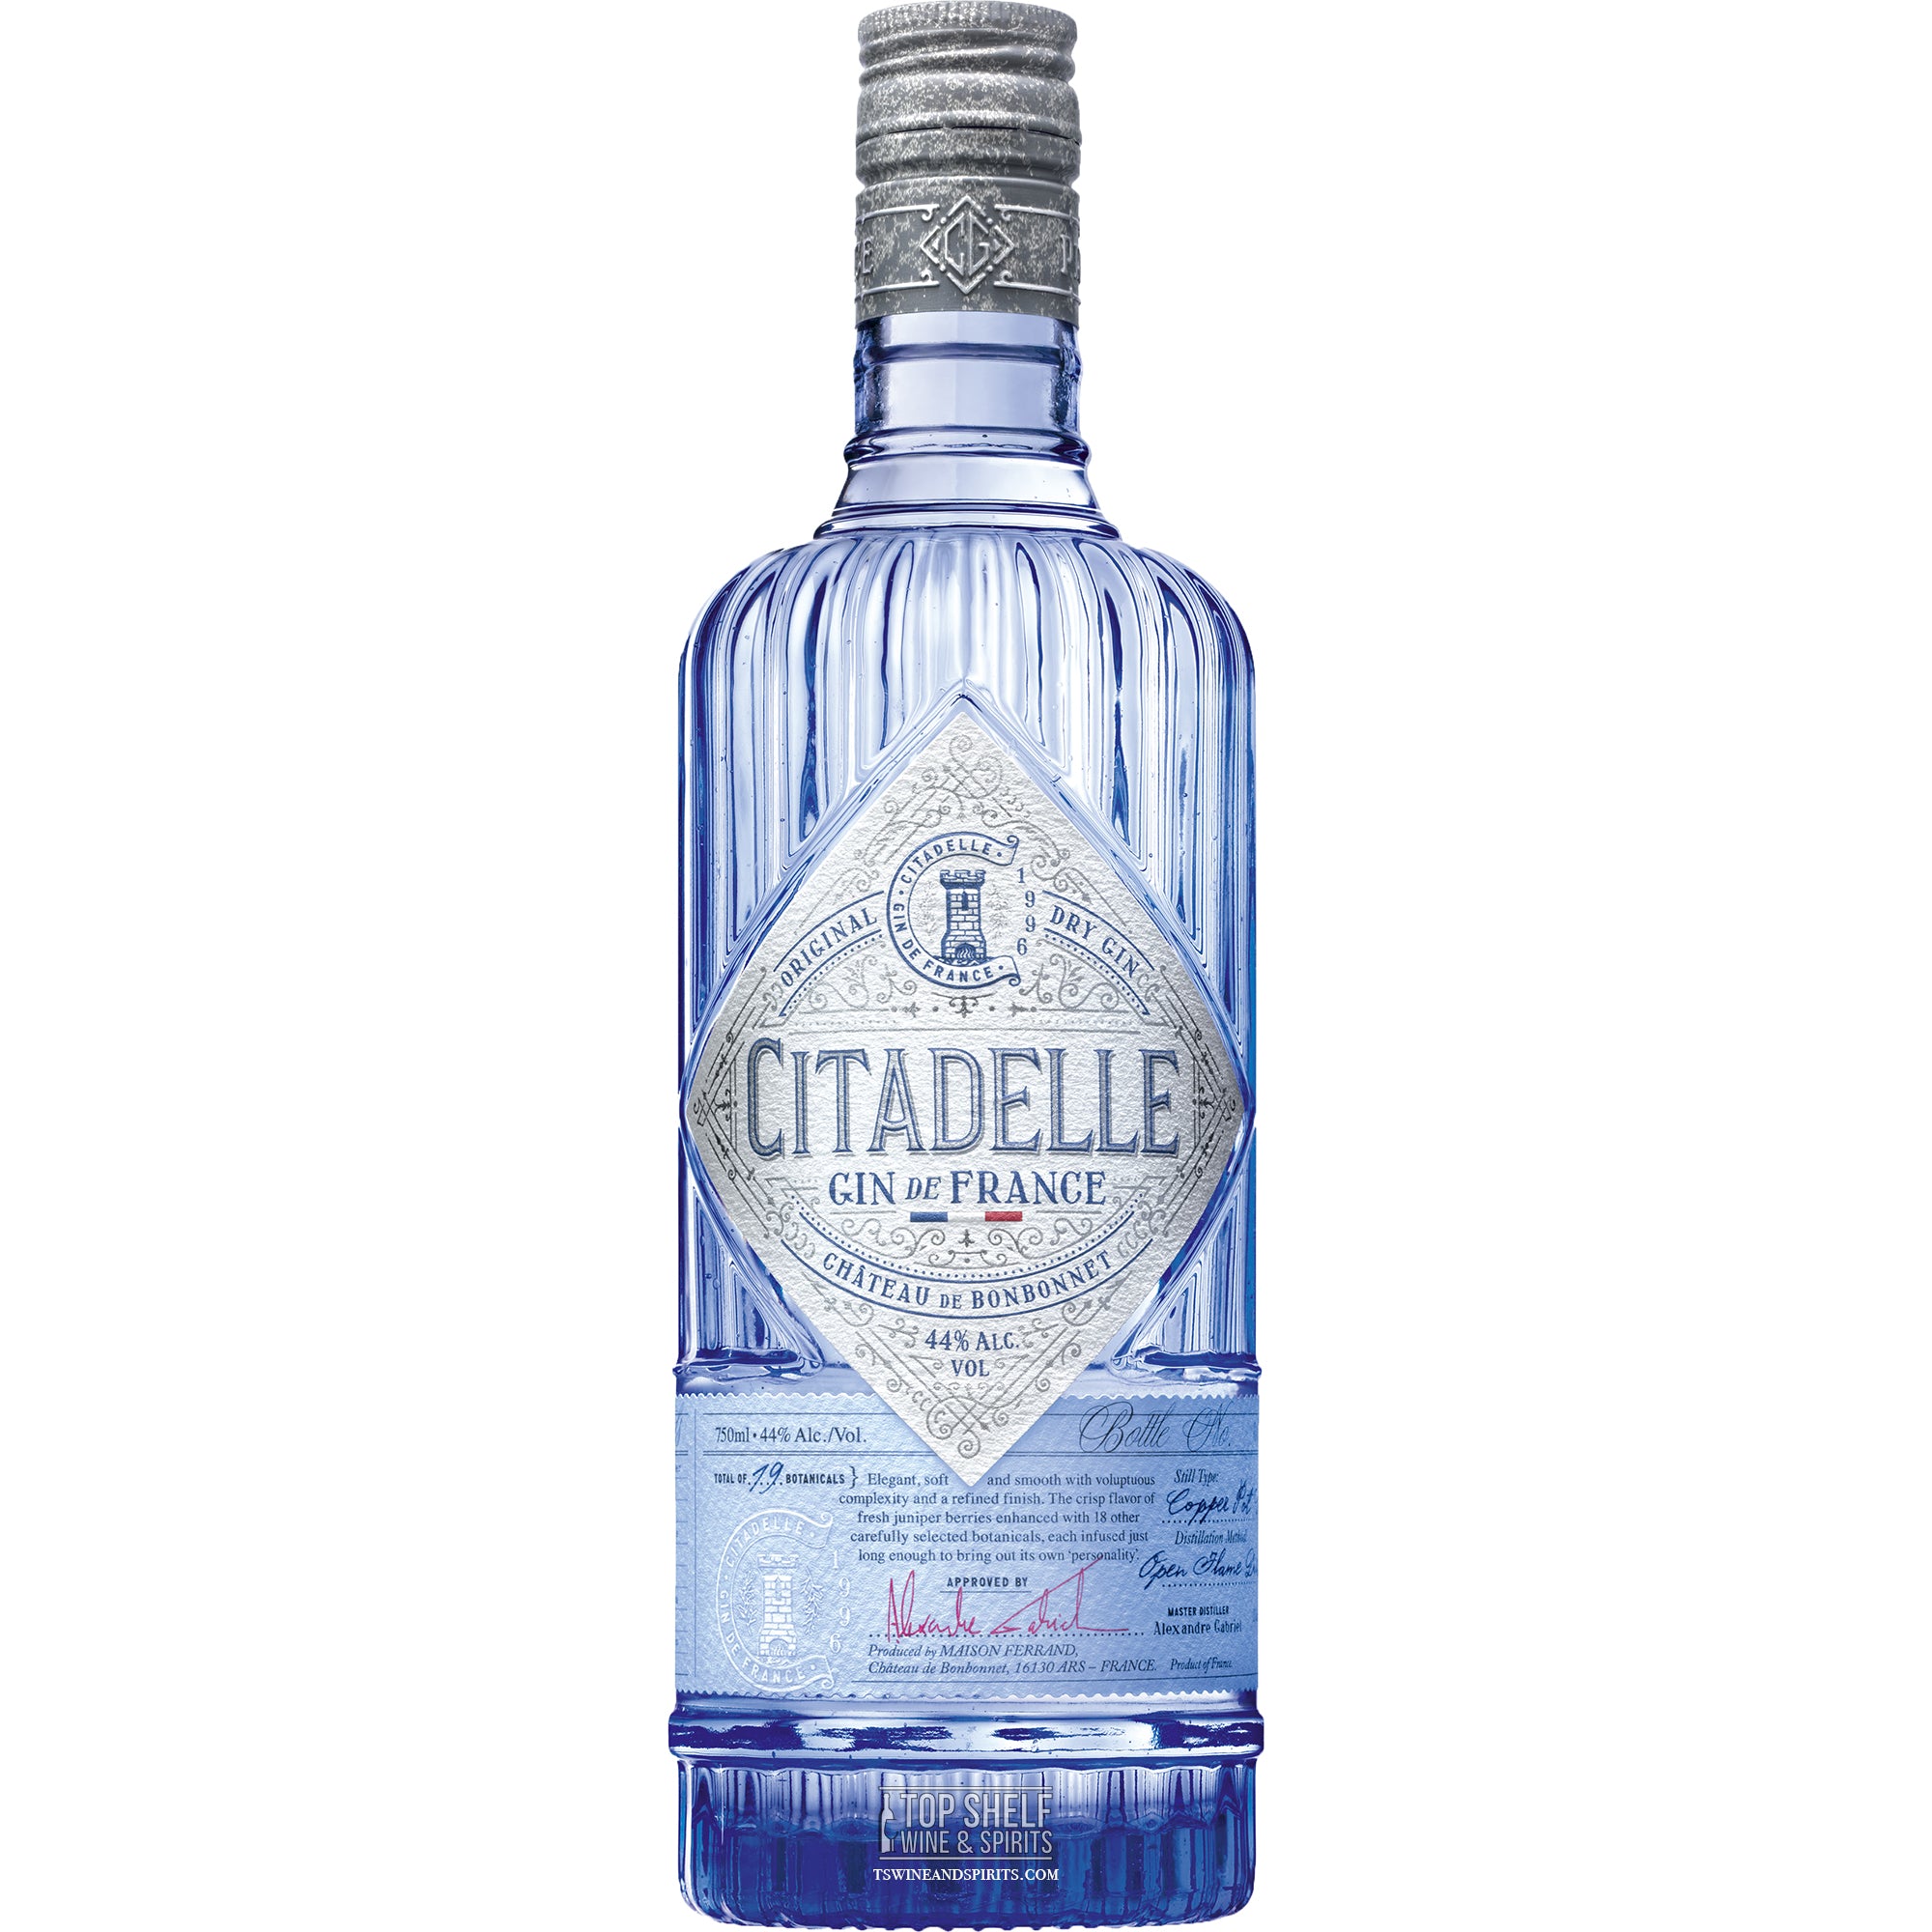 Citadelle Original Gin | Delivery To Your Home